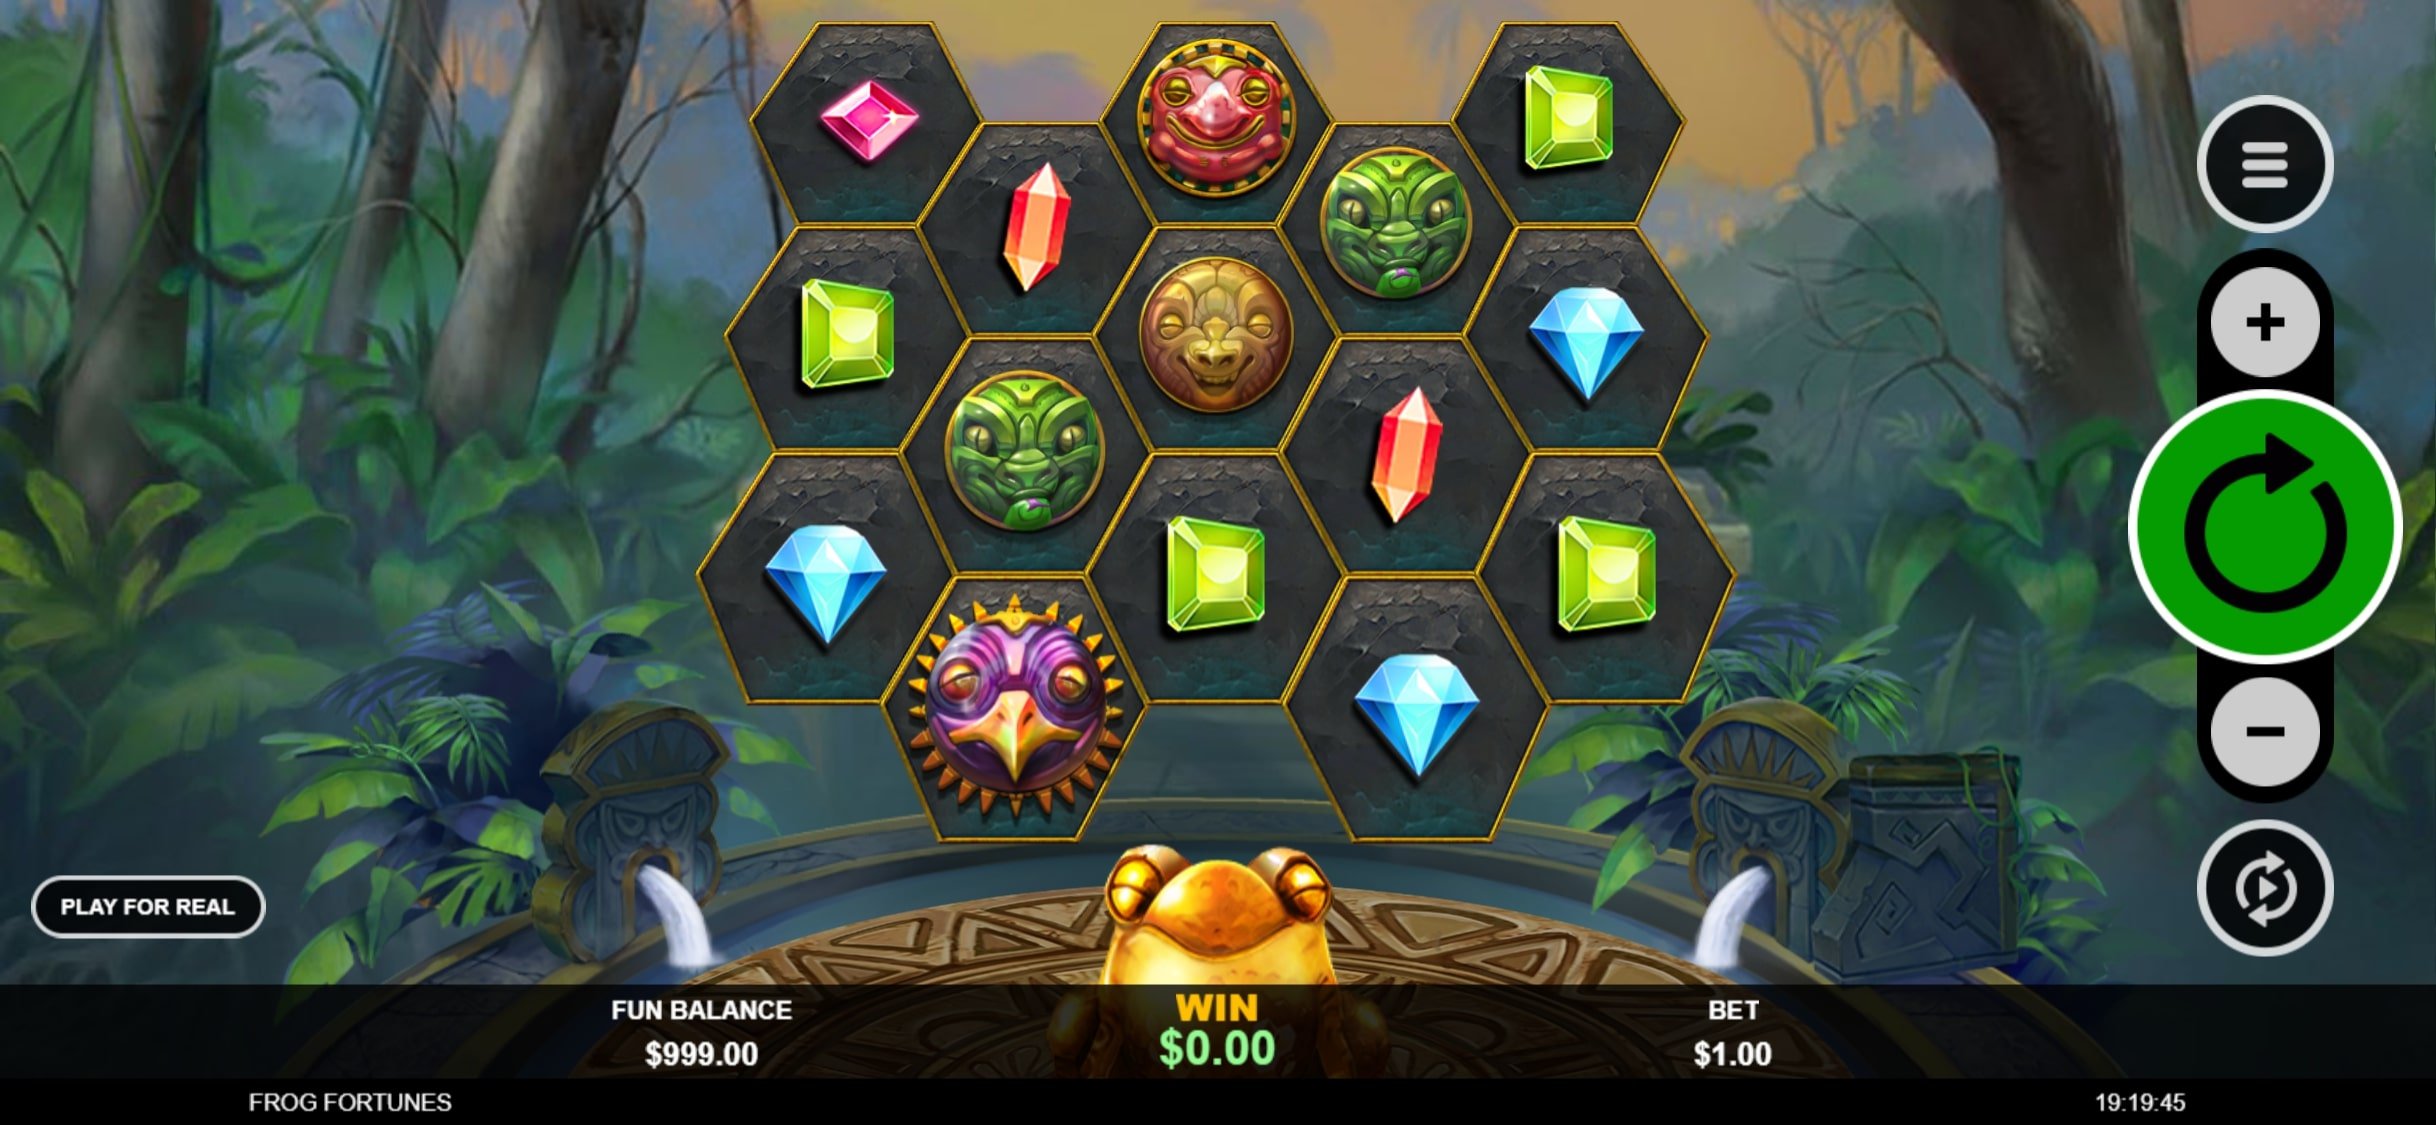 Royal Ace Casino Mobile Slot Games Review